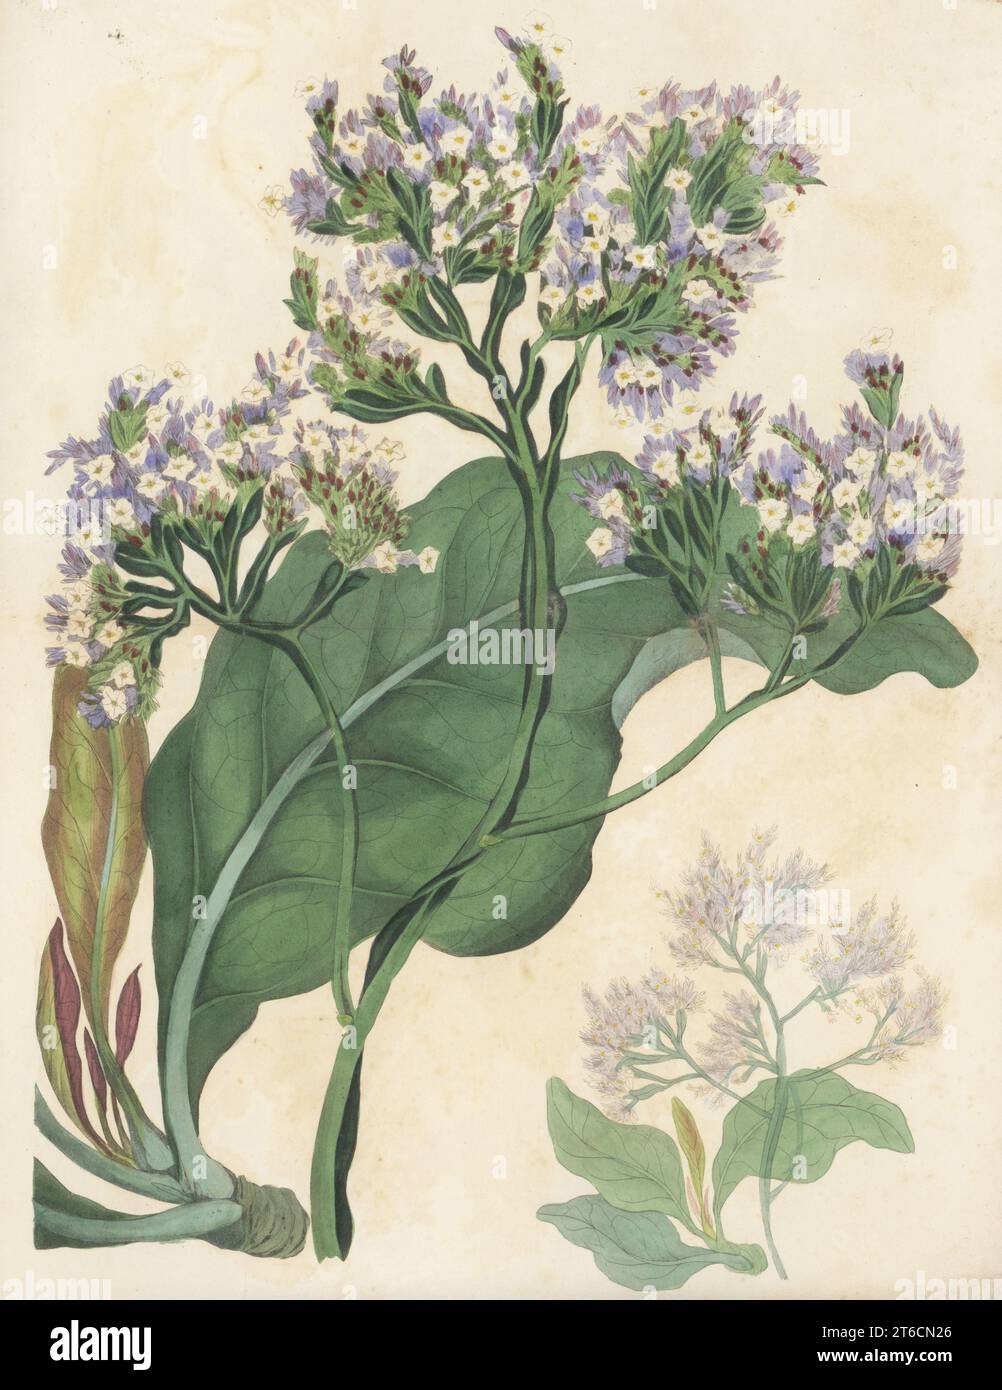 Sea lavender, Limonium arboreum. Native of the Canary Islands, found on Tenerife by English botanist Philip Barker-Webb. Drawn at Exeter Nursery. Arboreus statice, Statice arborea. Handcoloured engraving after a botanical illustration by Miss Morrish from Joseph Paxtons Magazine of Botany, and Register of Flowering Plants, Volume 4, Orr and Smith, London, 1837. Stock Photo